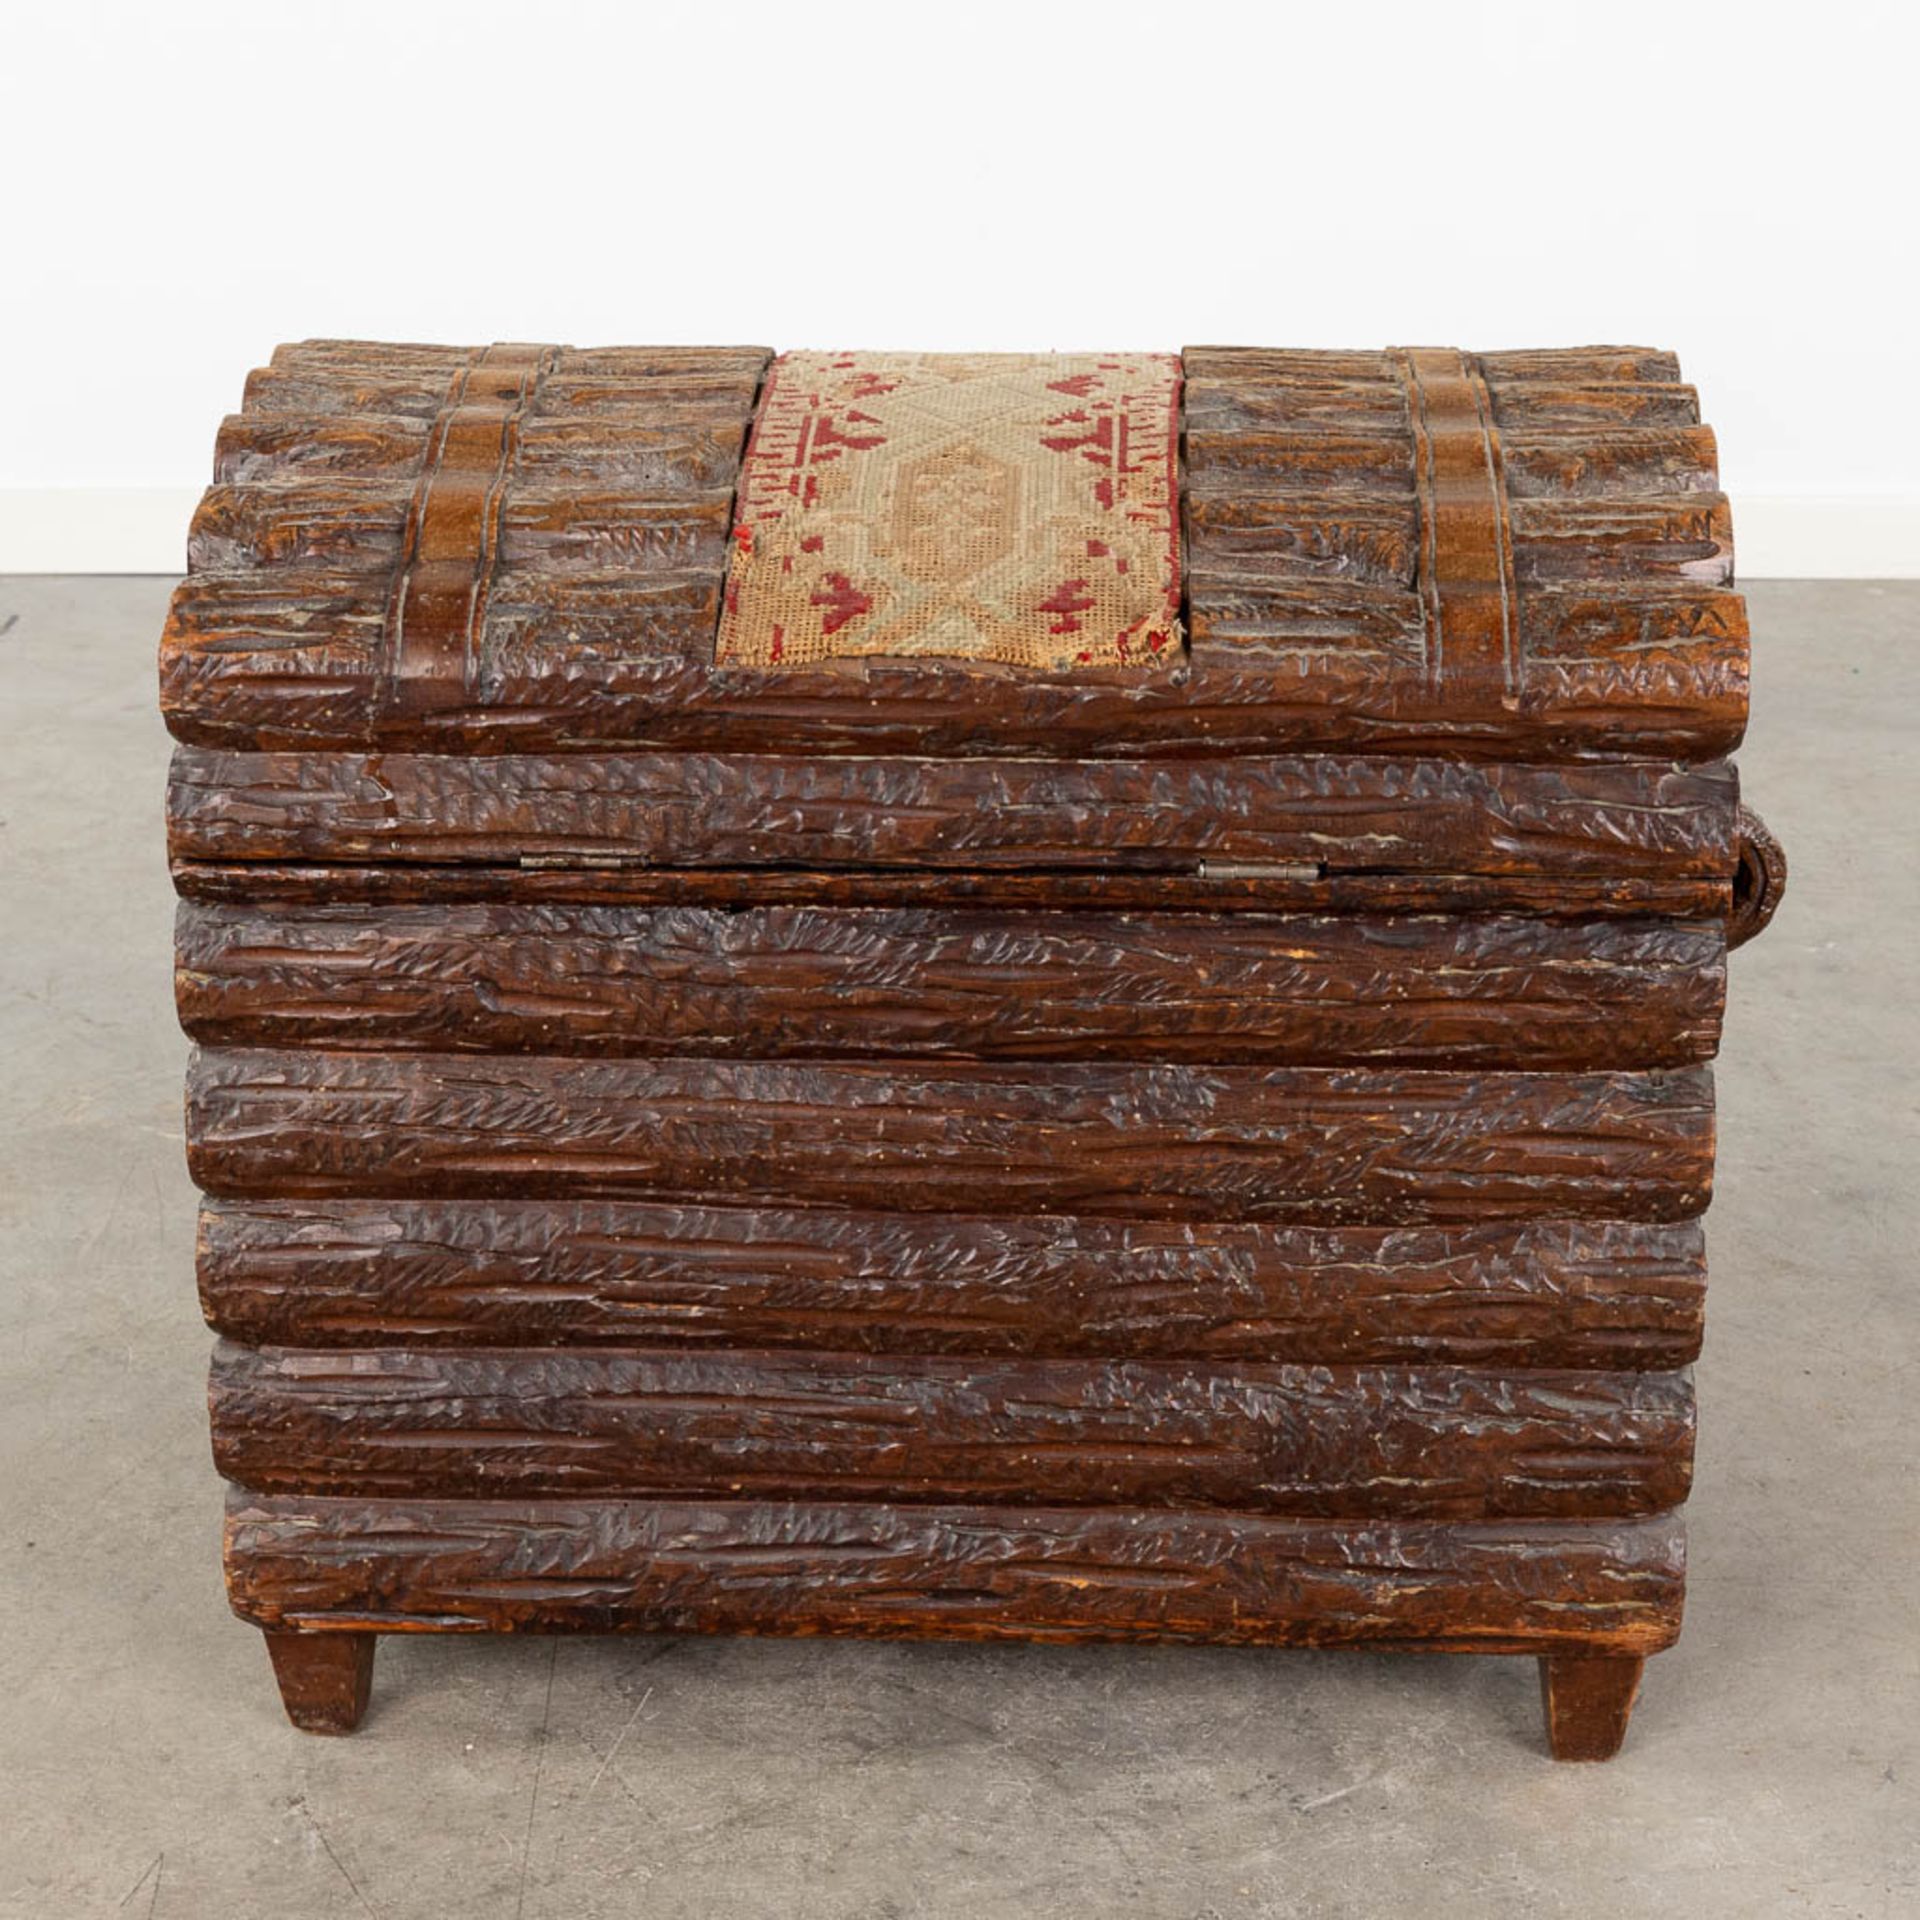 A decorative chest with wood sculptures finished with fabric. (L:39 x W:64 x H:51 cm) - Bild 6 aus 15